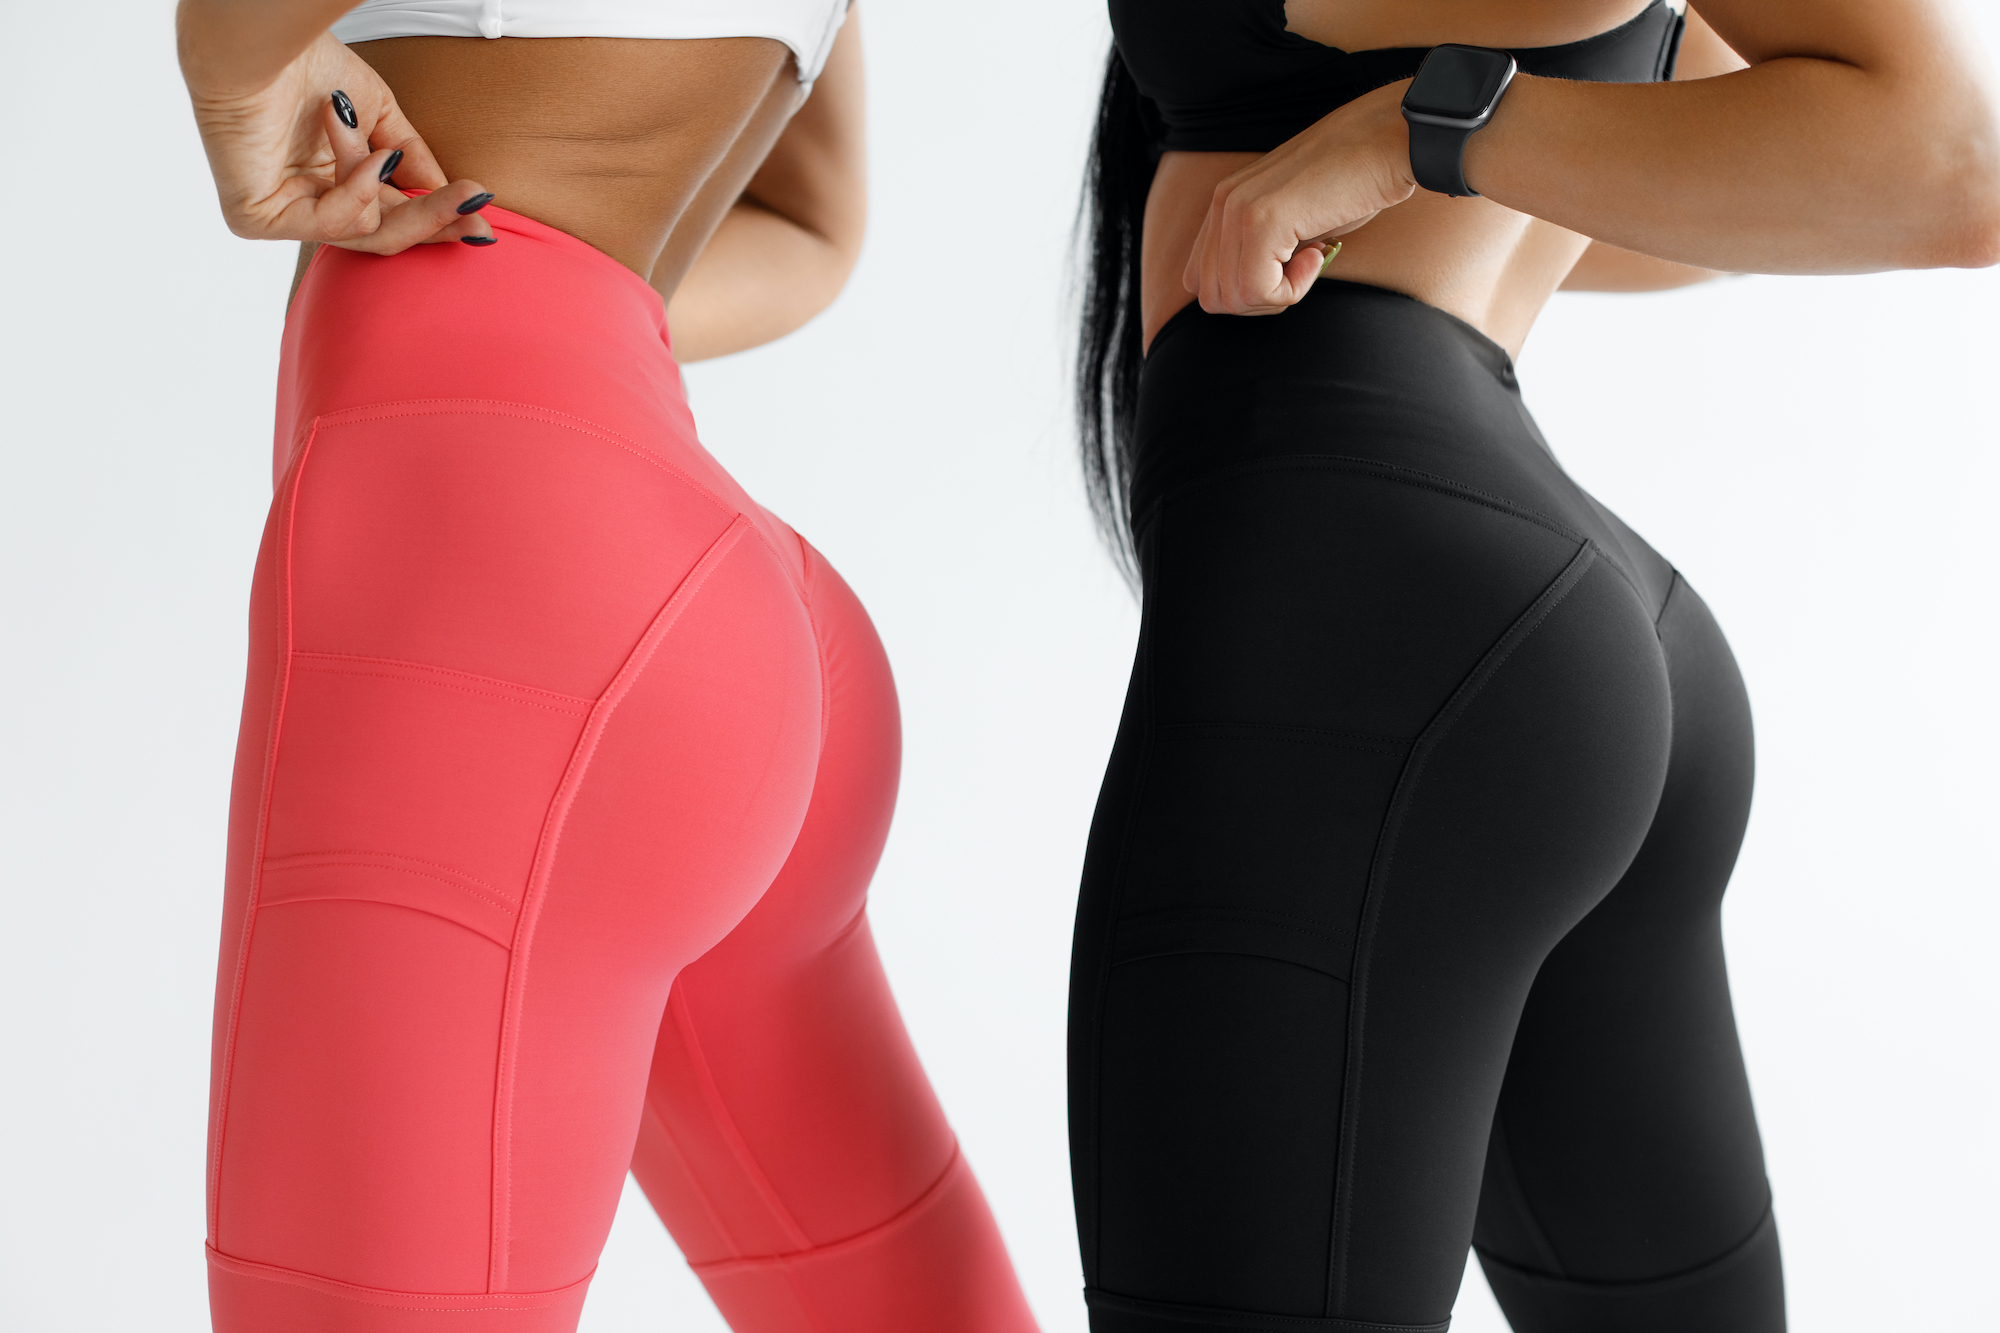 I bought the viral butt-lifting leggings - I was skeptical but they make my  booty look 100x better, it's doing wonders